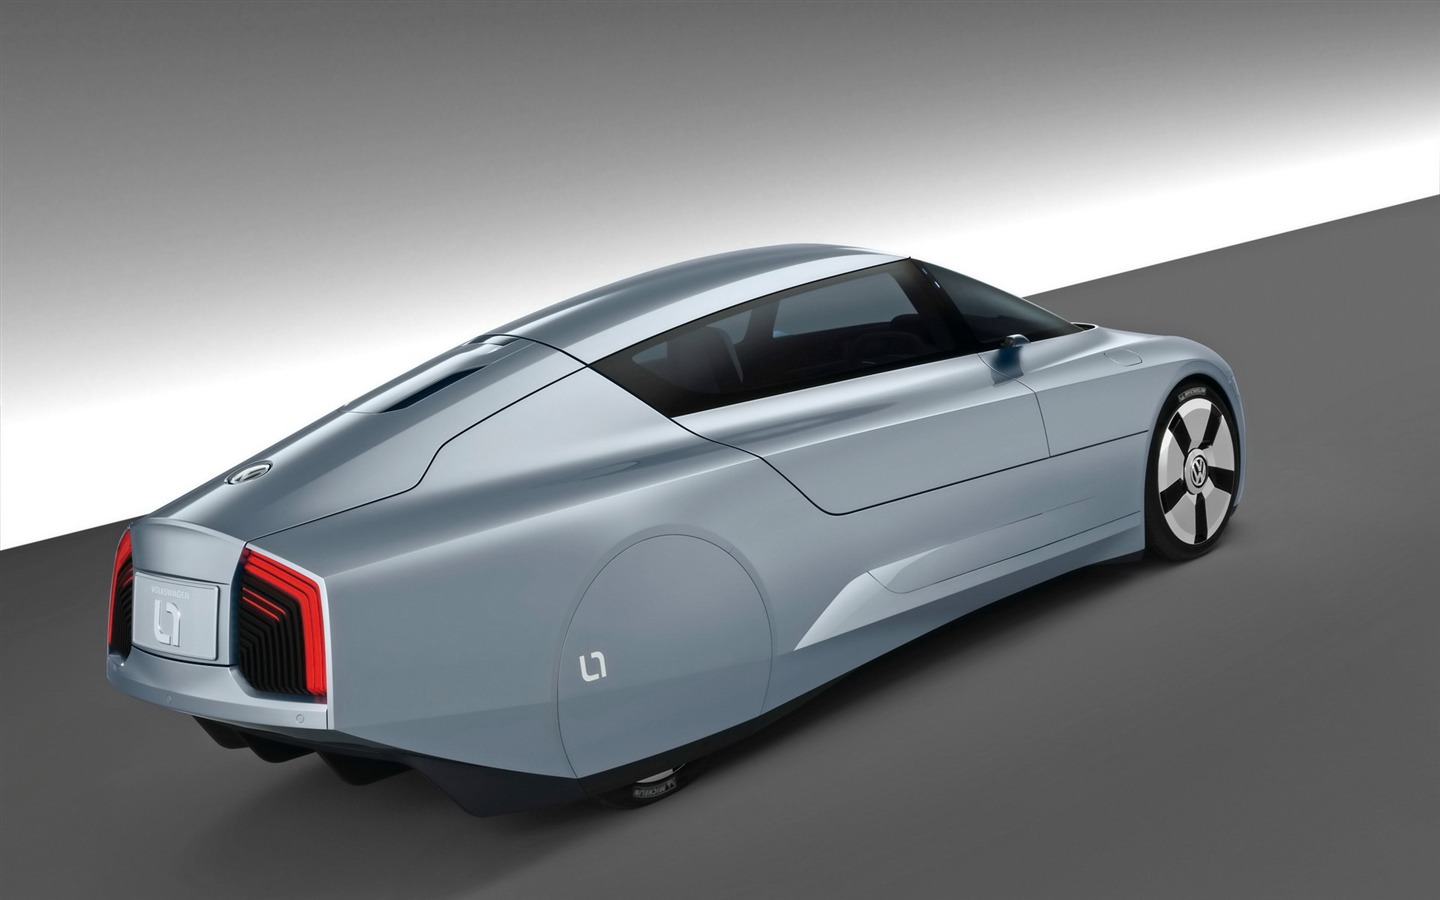 Volkswagen L1 Tapety Concept Car #23 - 1440x900